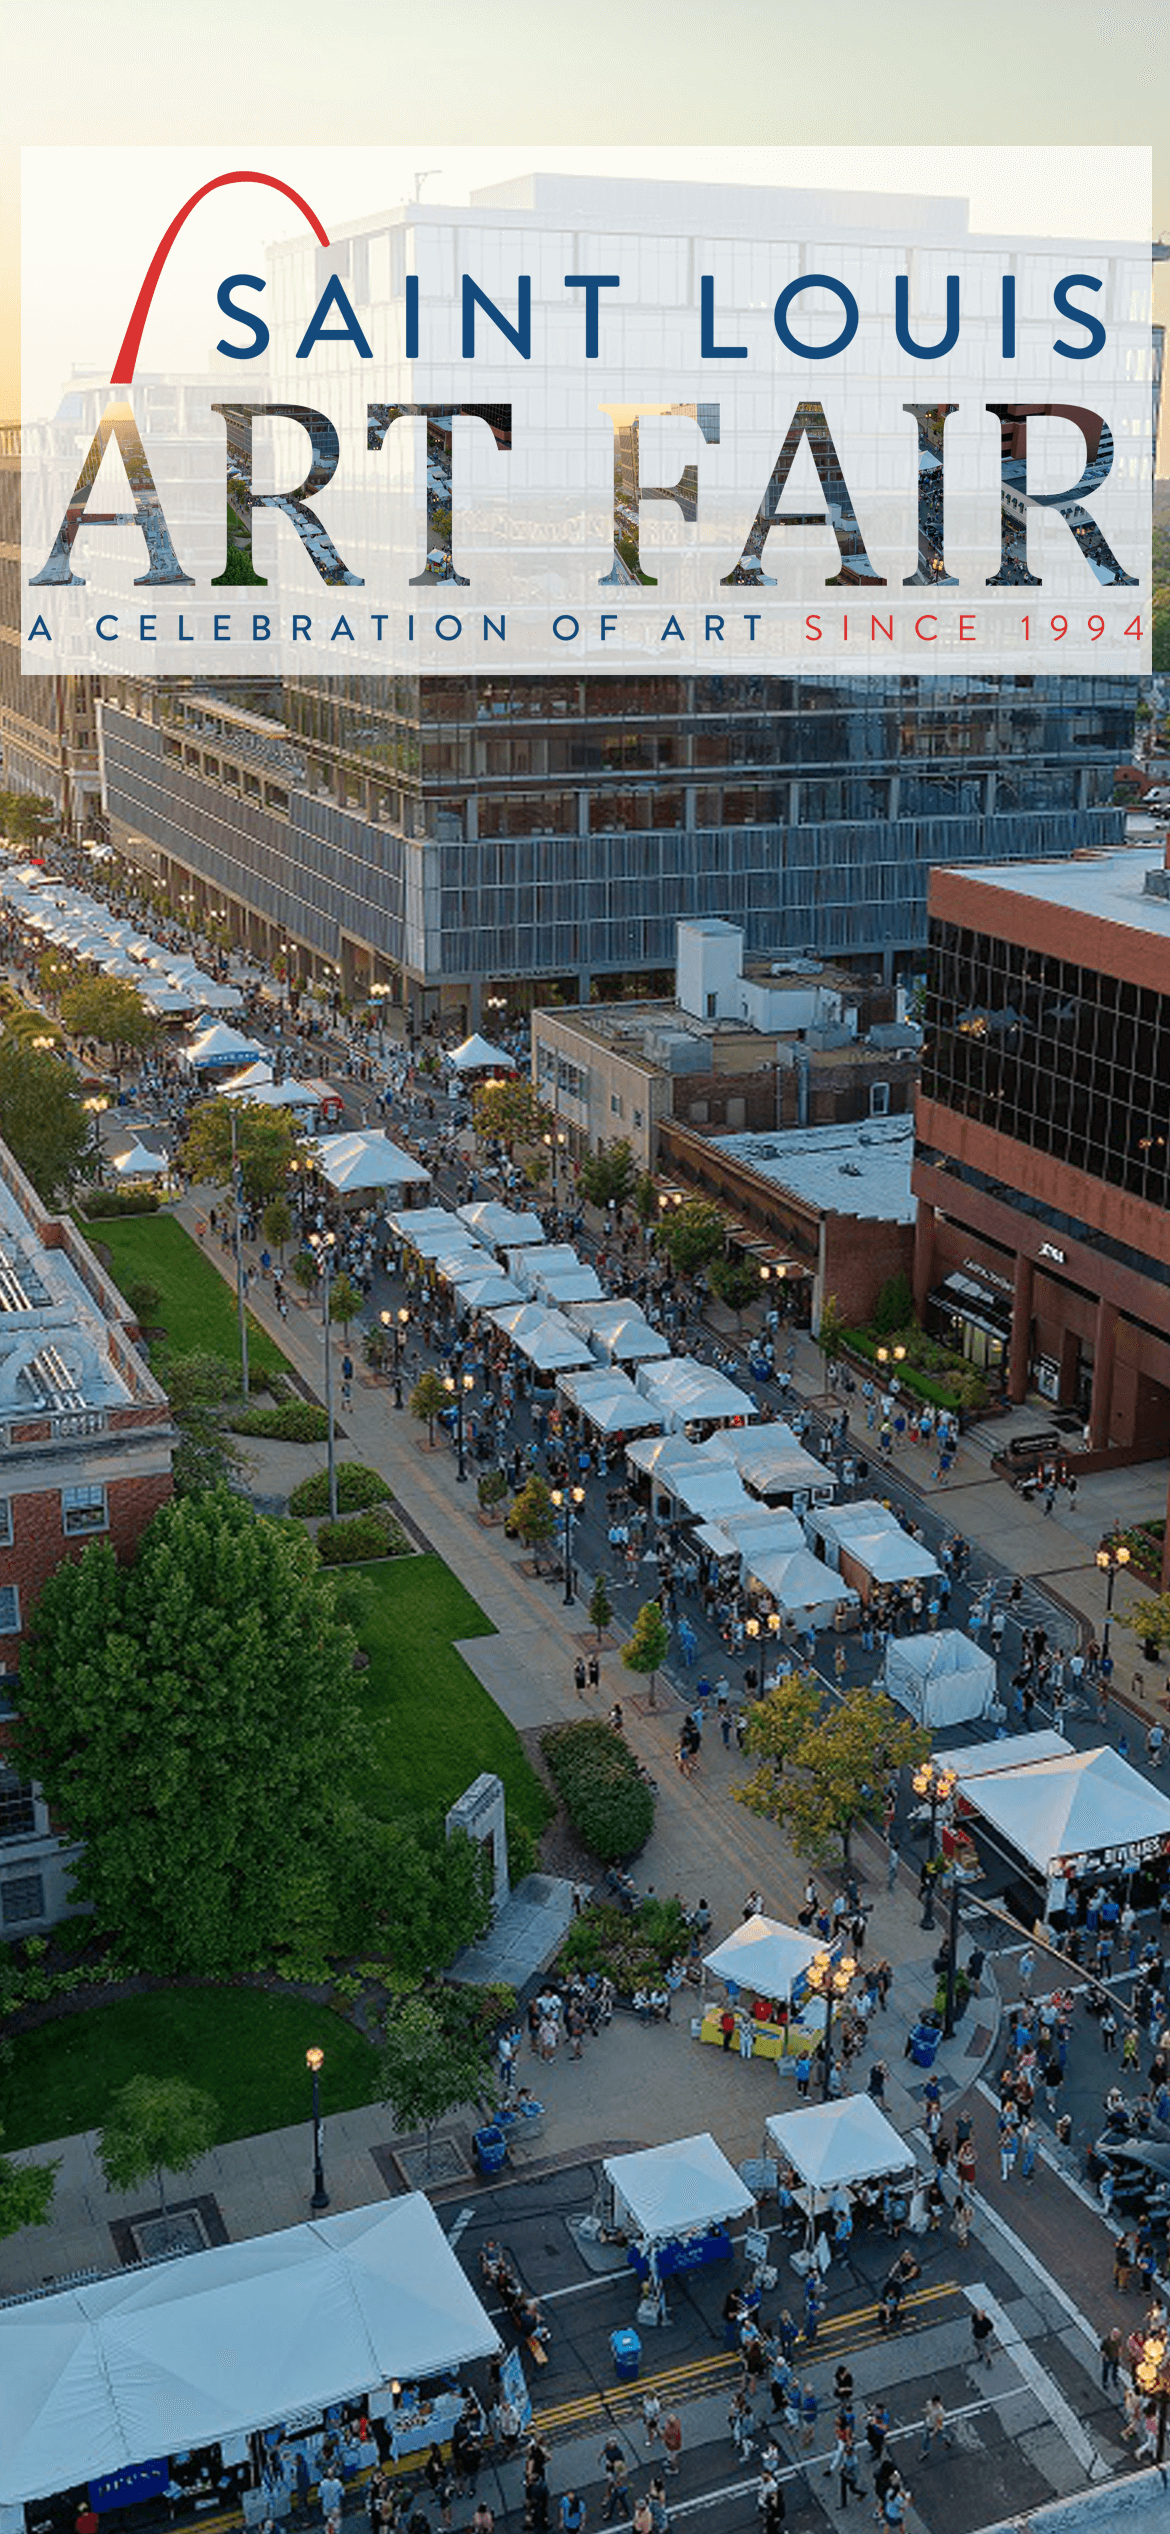  See you in 2024 for the 31st Saint Louis Art Fair!  